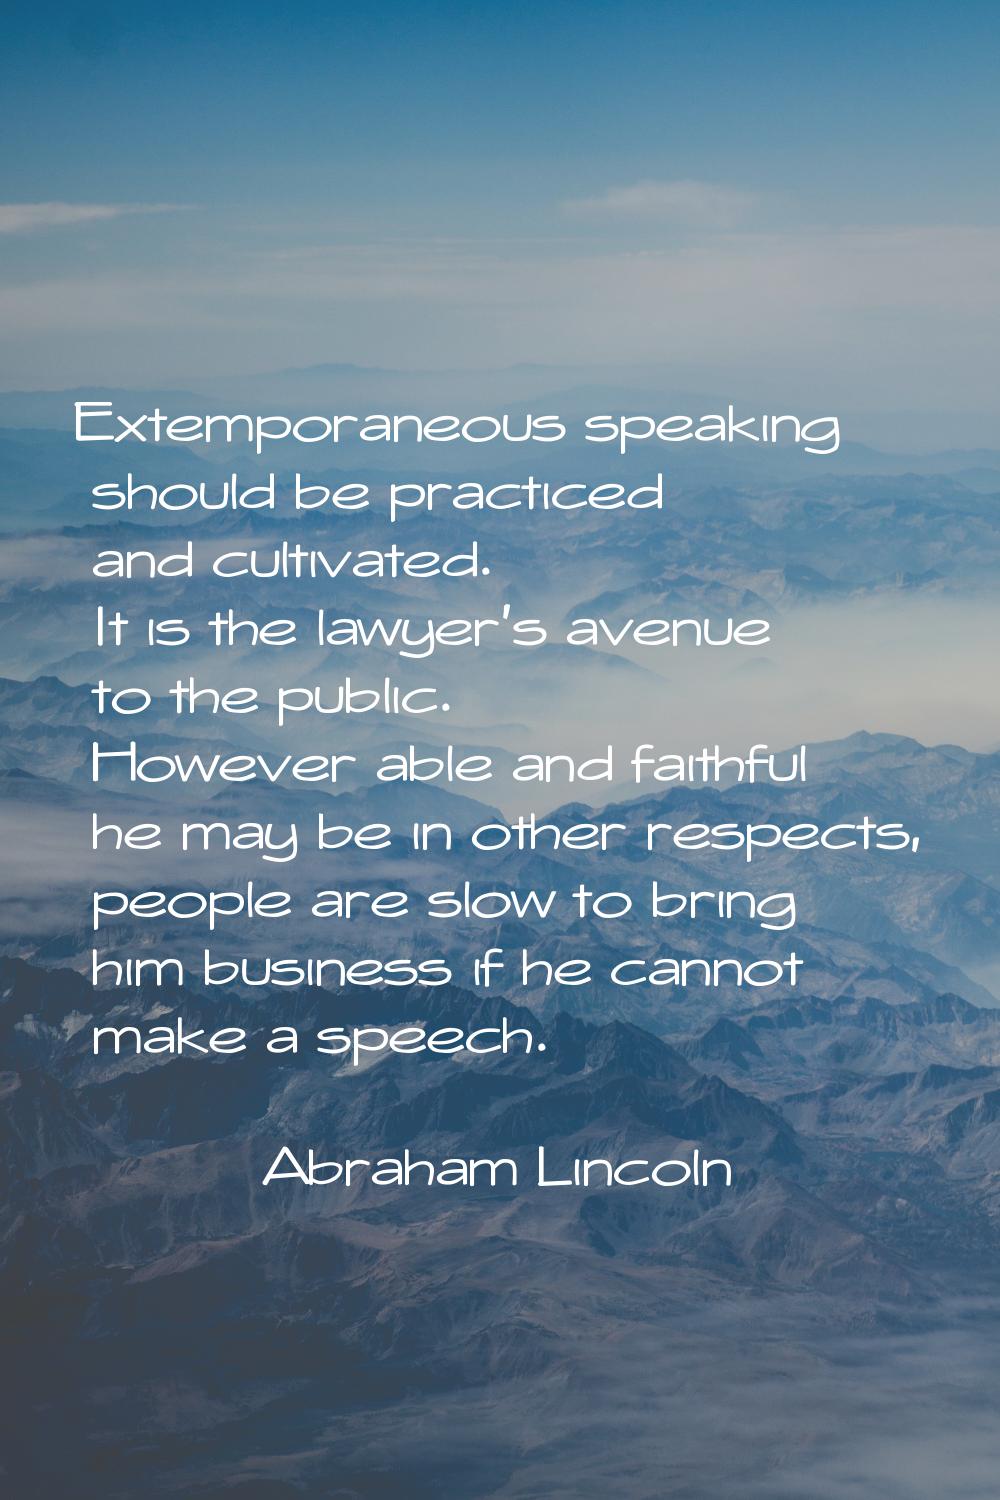 Extemporaneous speaking should be practiced and cultivated. It is the lawyer's avenue to the public